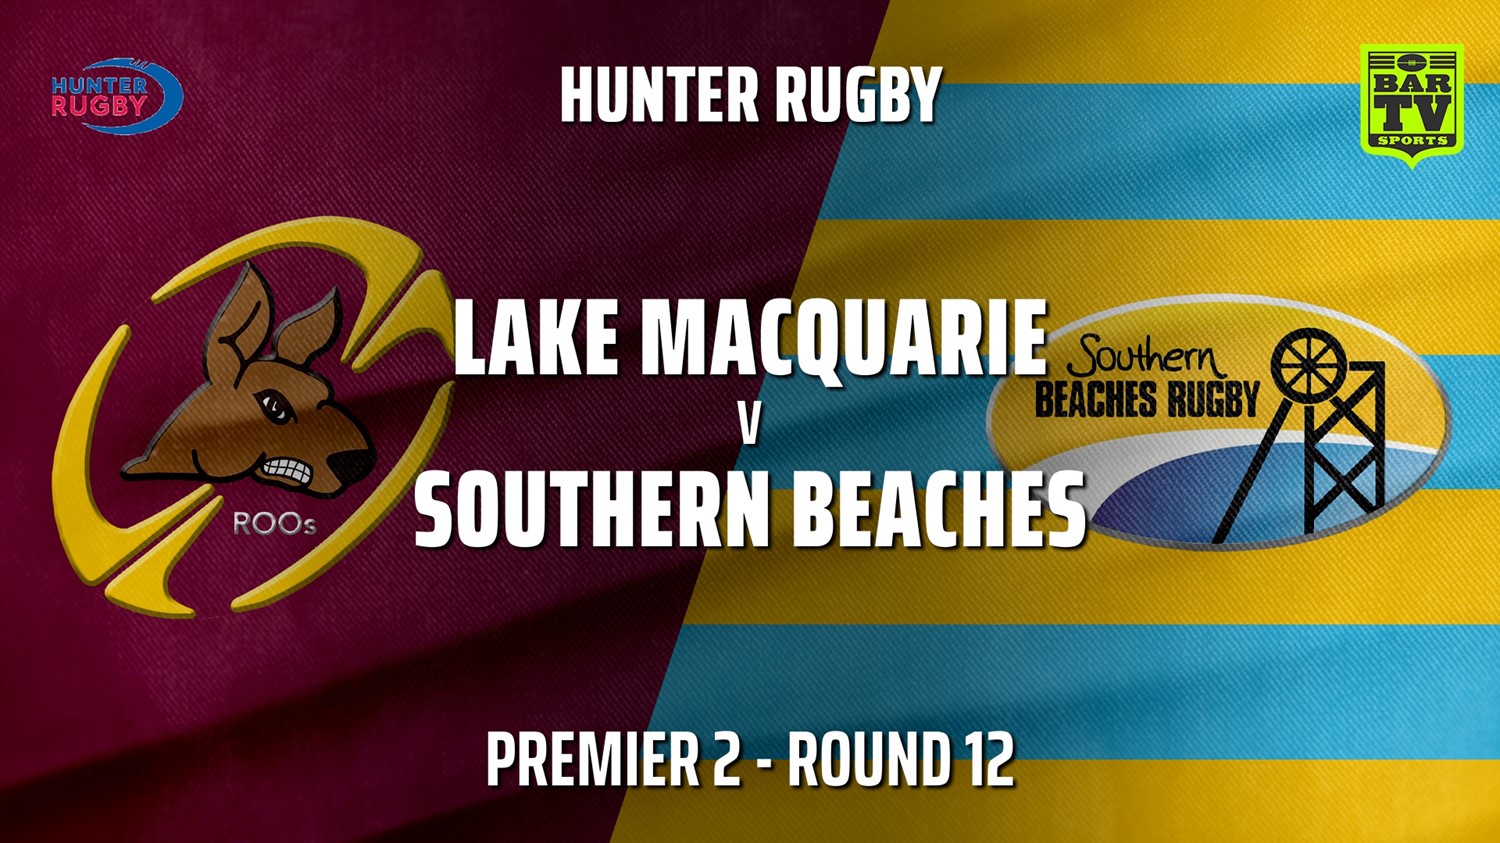 210710-Hunter Rugby Round 12 - Premier 2 - Lake Macquarie v Southern Beaches Slate Image